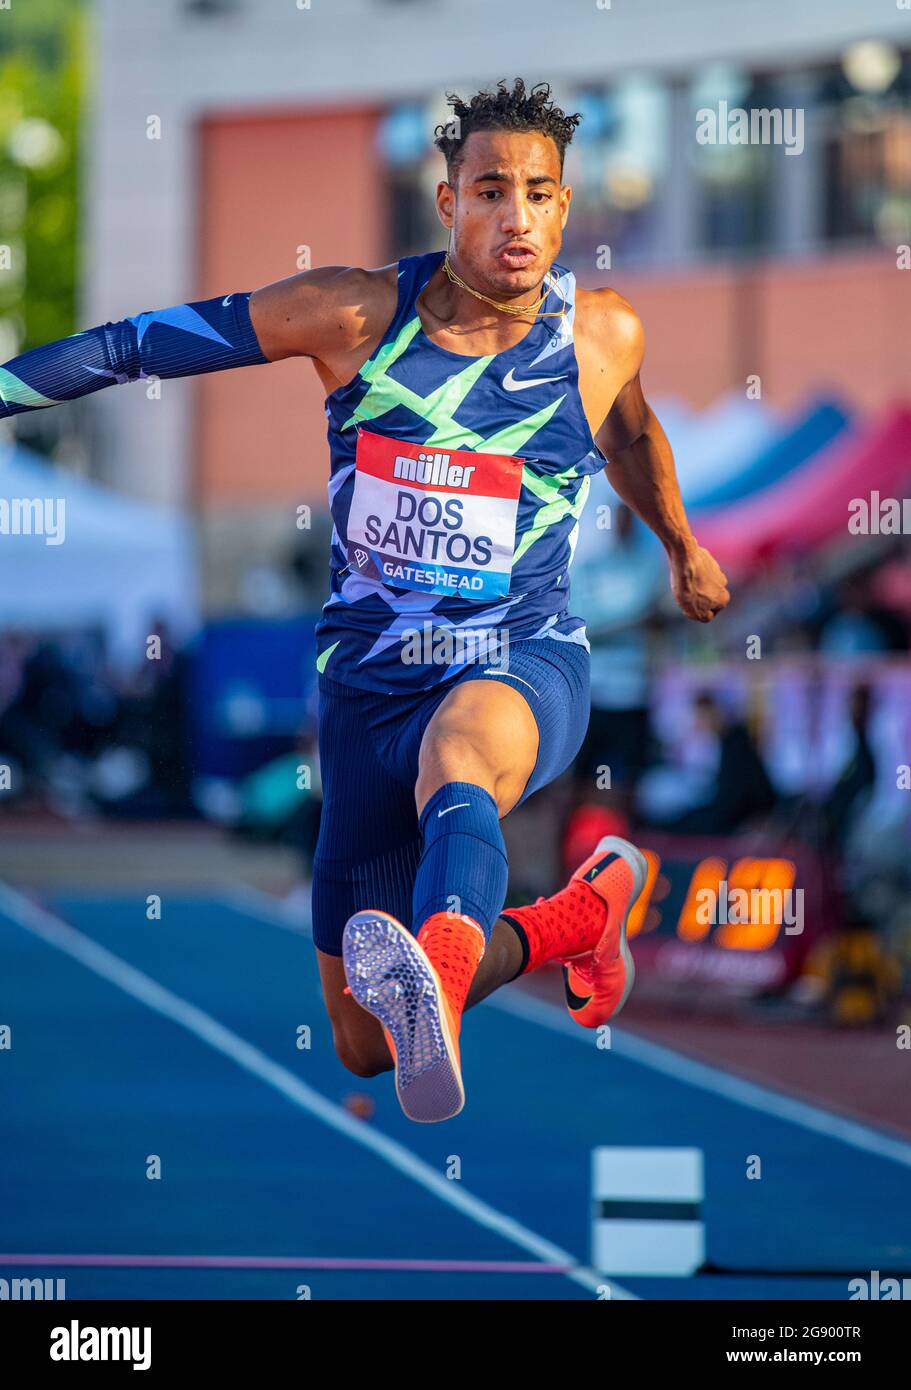 GATESHEAD, ENGLAND - JULY 13: Almir dos Santos (BRA) competing in the triple jump at the Muller British Grand Prix, part of the Wanda Diamond League a Stock Photo